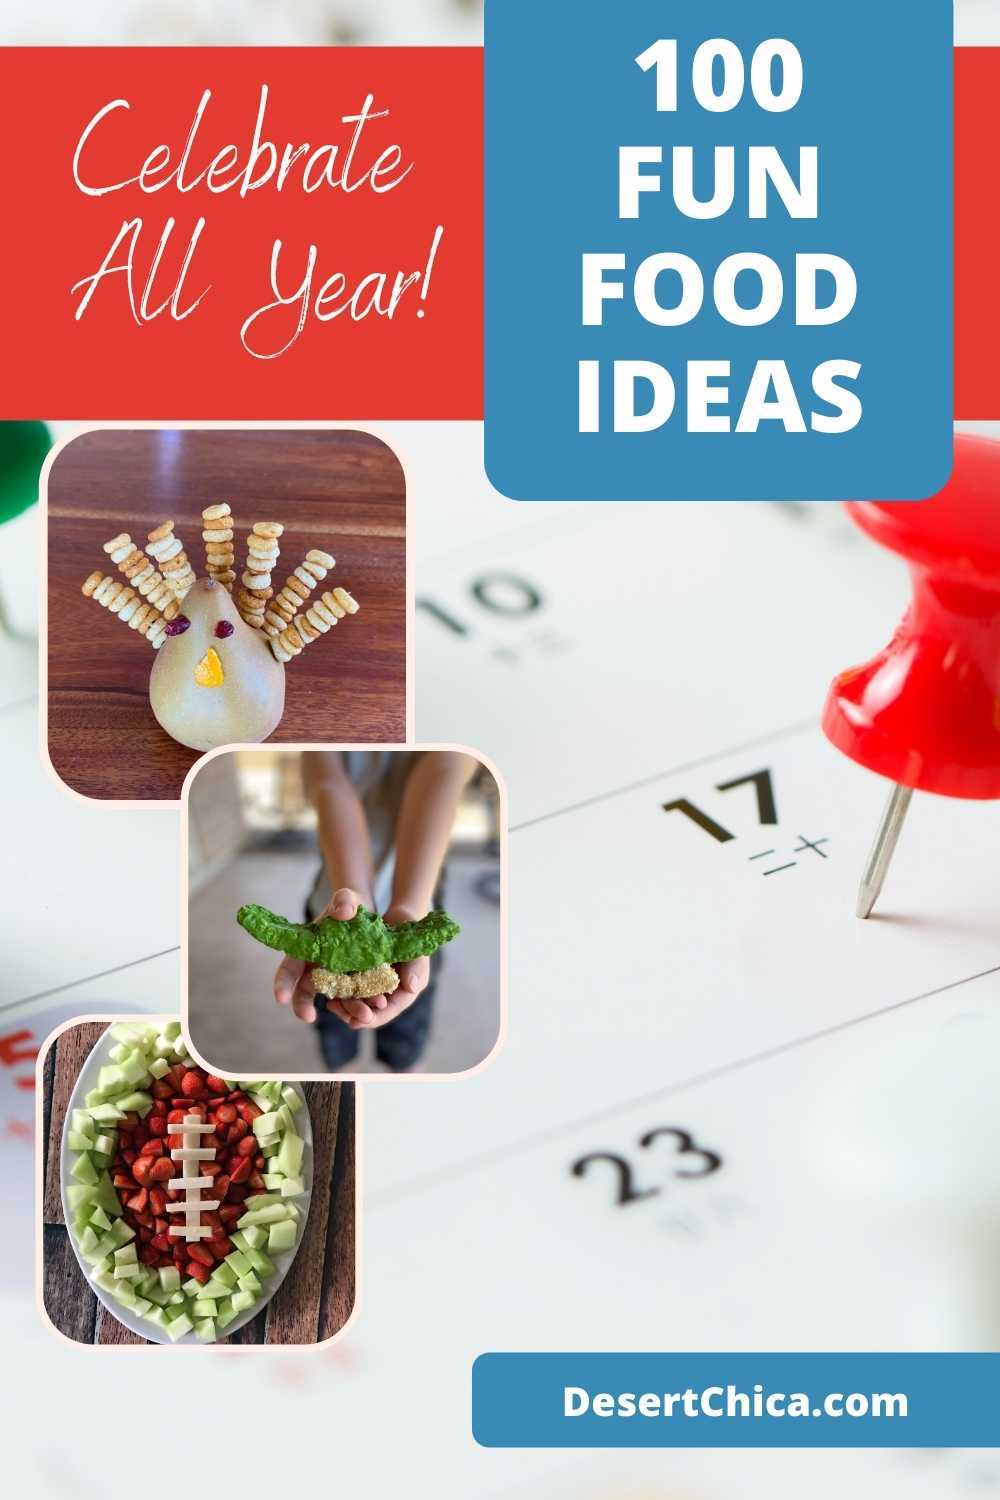 100 Fun Foods To Make In 2021 For National Days | Desert Chica